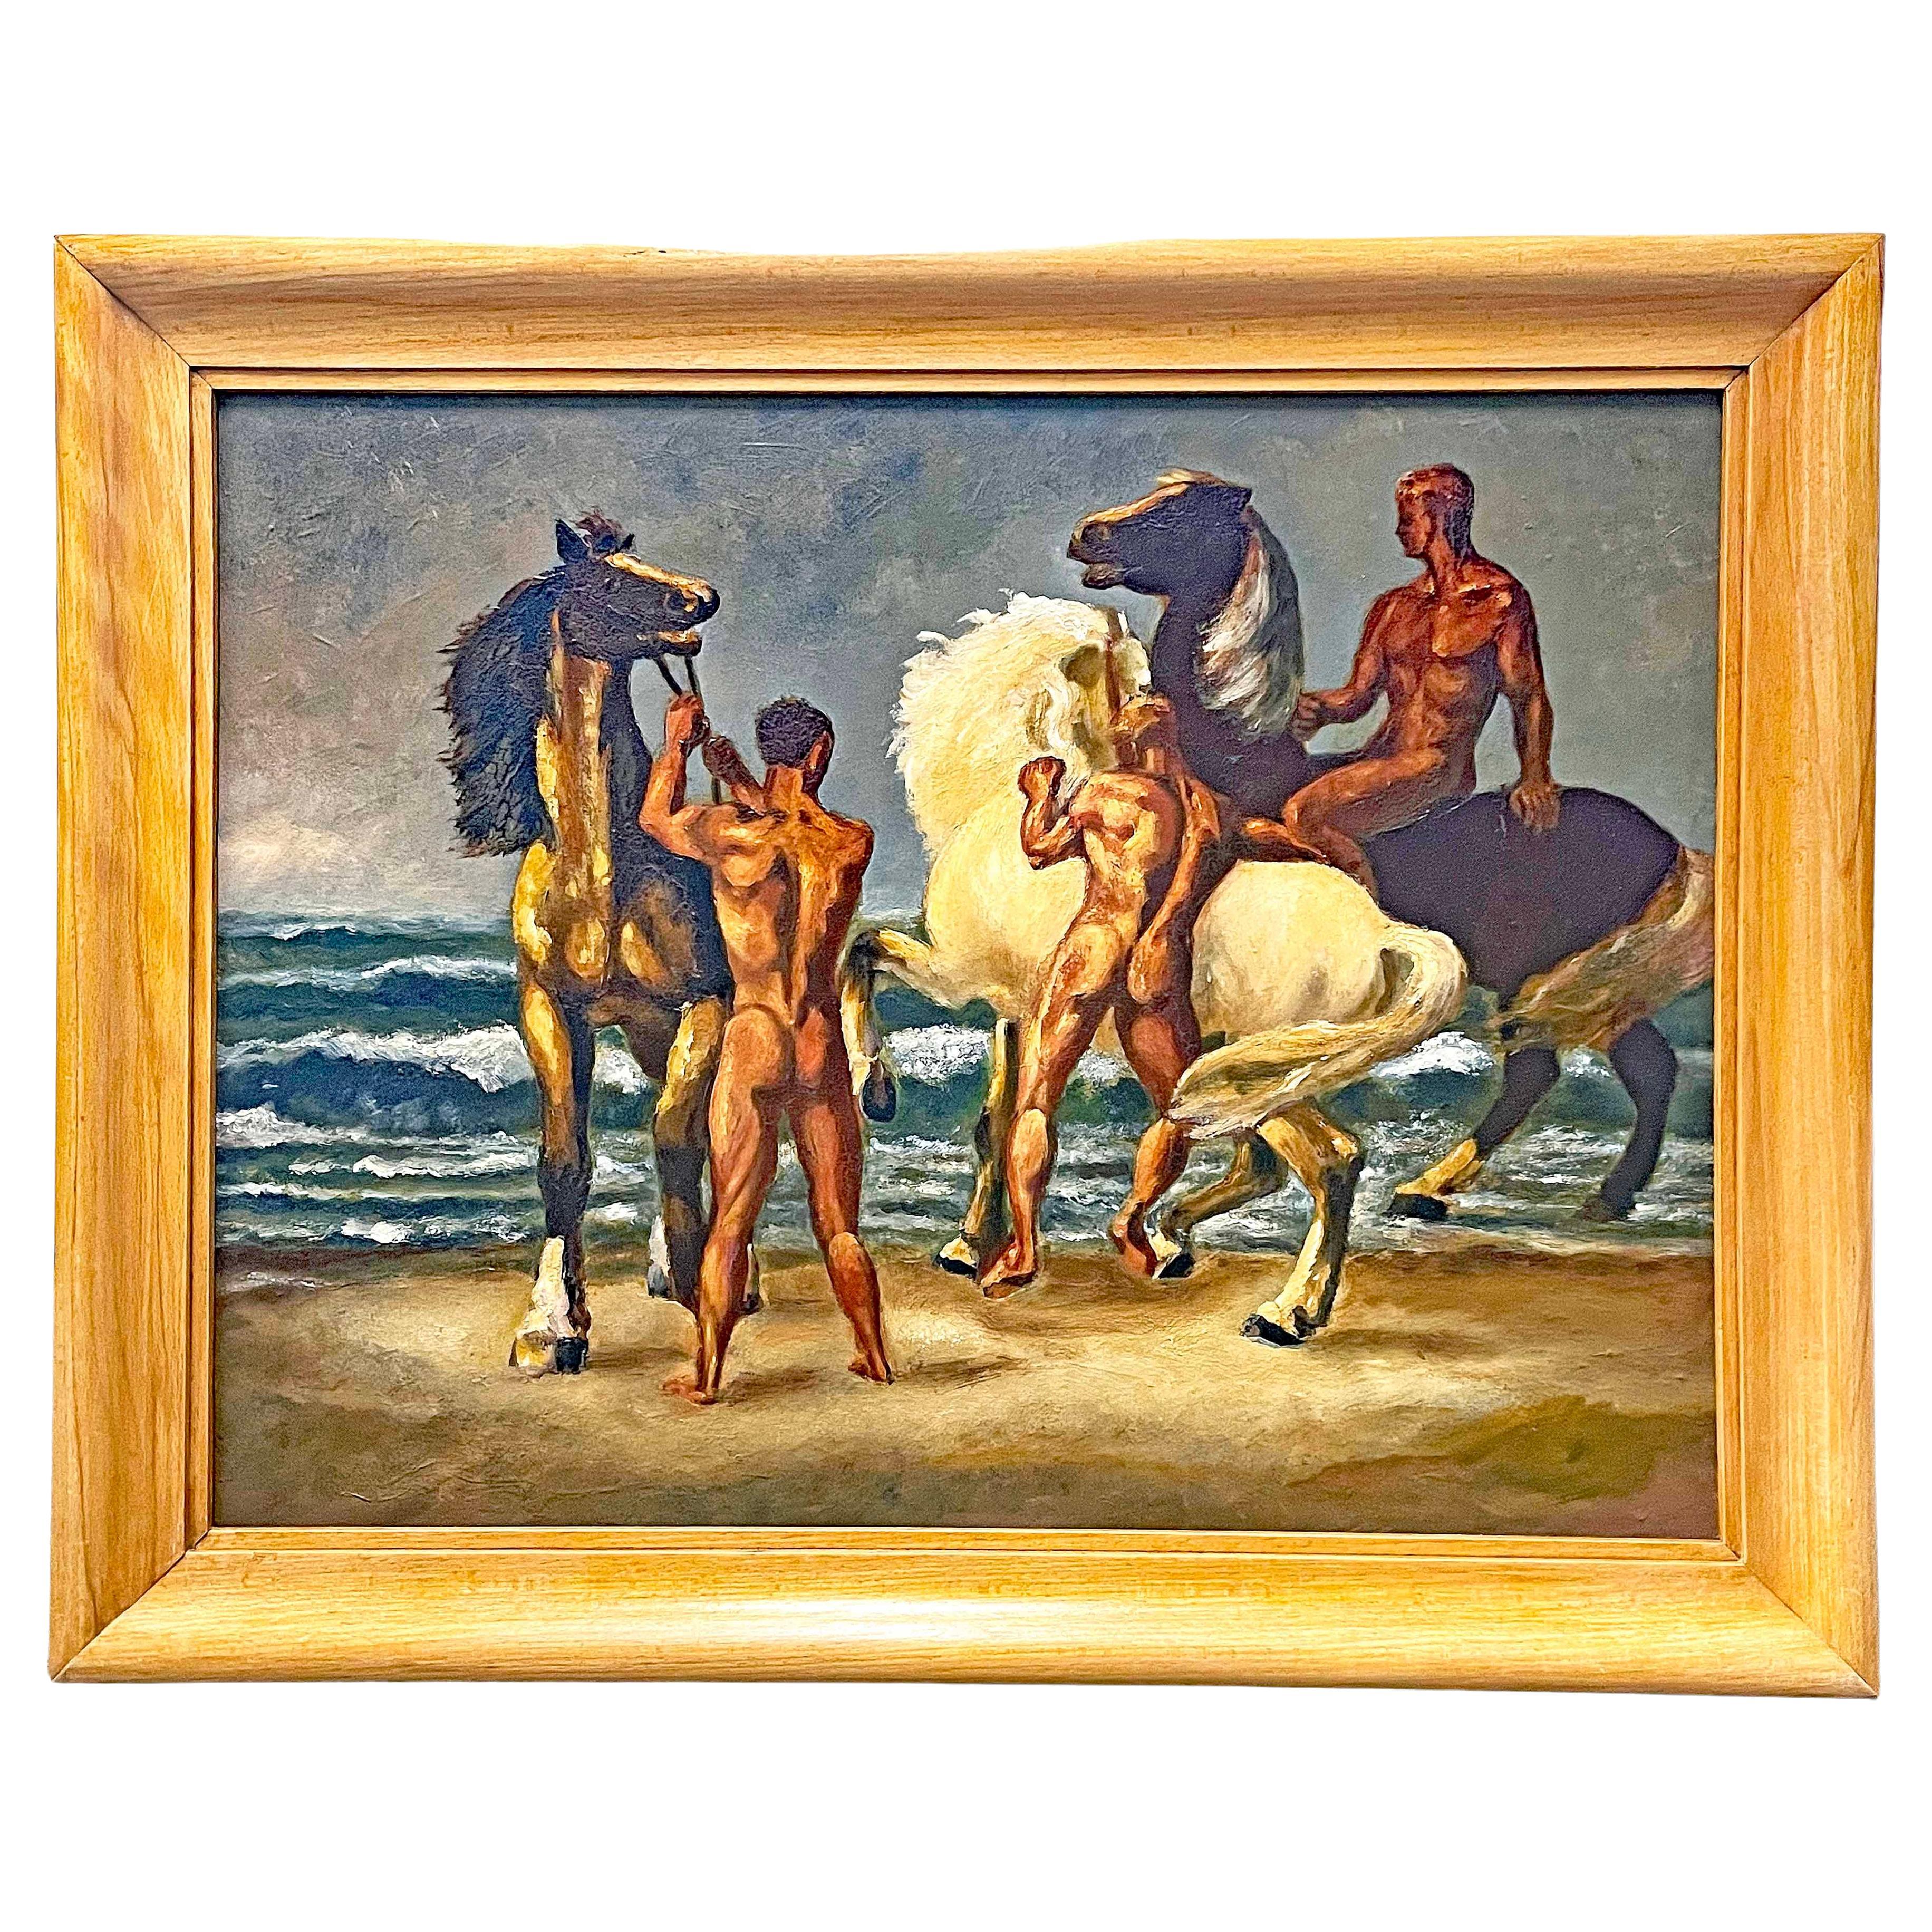 "Nudes in the Surf", Atmospheric Painting with Male Nudes and Horses